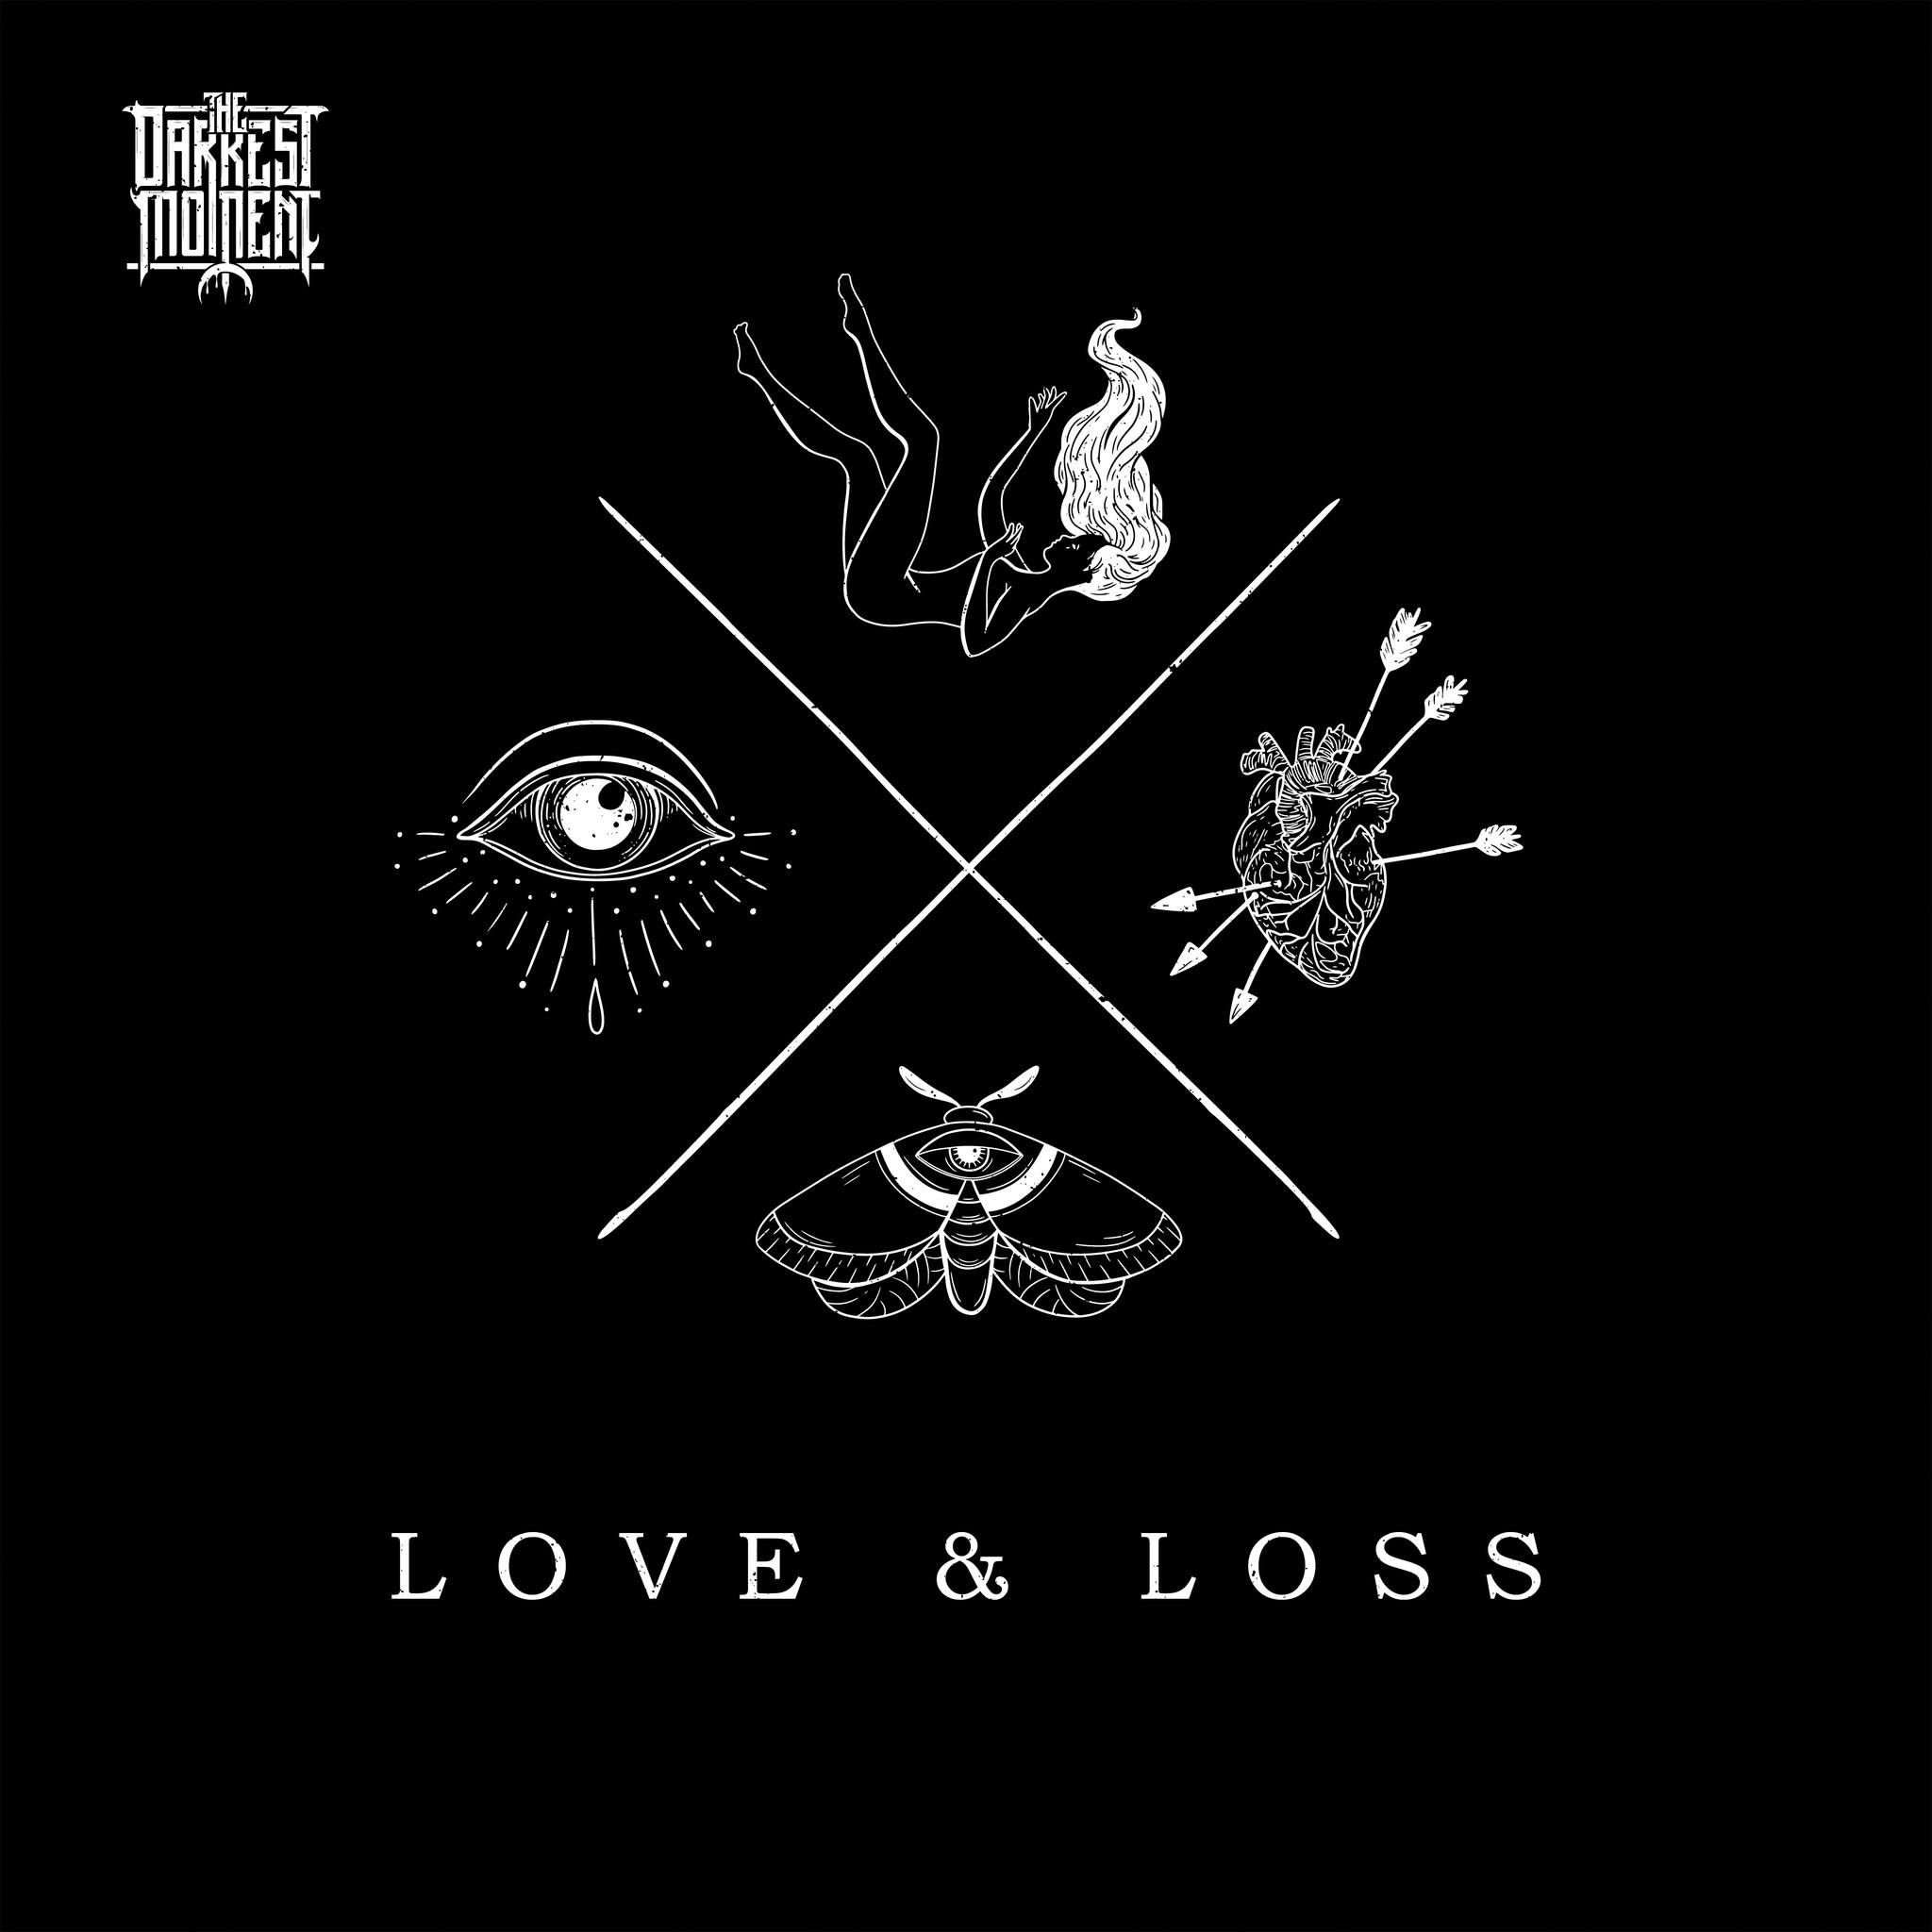 EP REVIEW: Love & Loss - The Darkest Moment - Distorted Sound Magazine